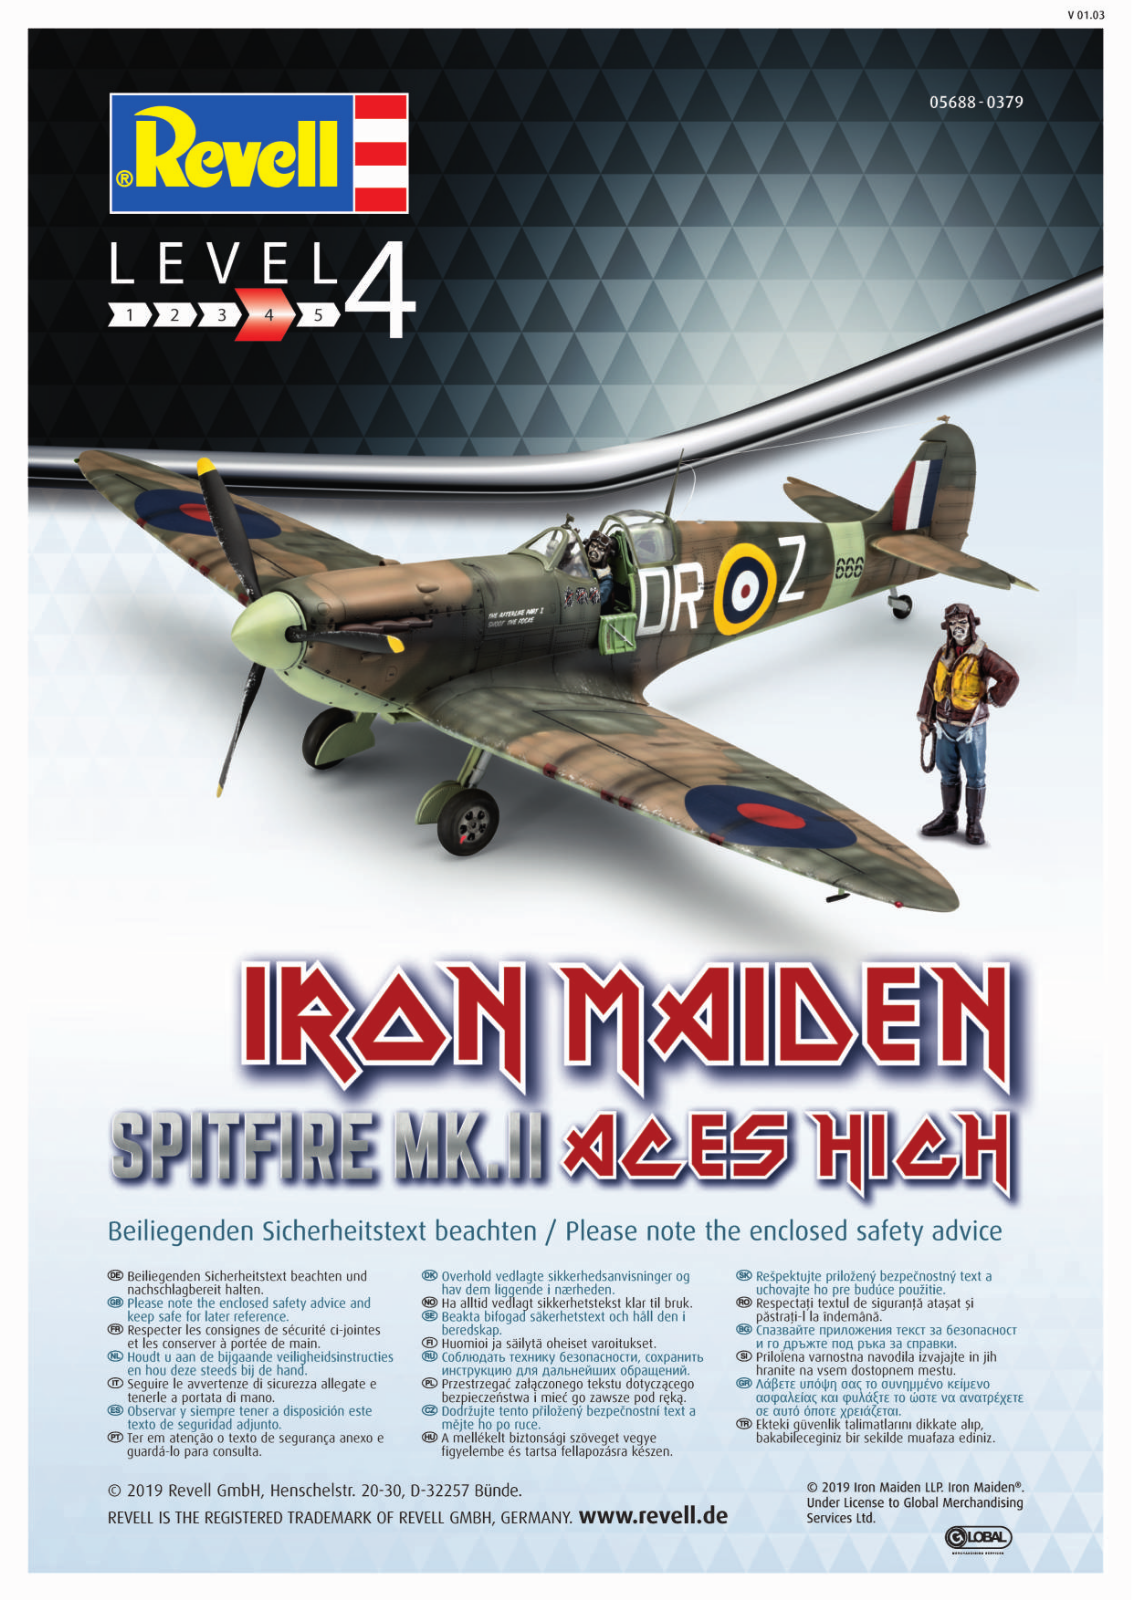 Revell Spitfire Mk.II Aces High Iron Maiden Service Manual